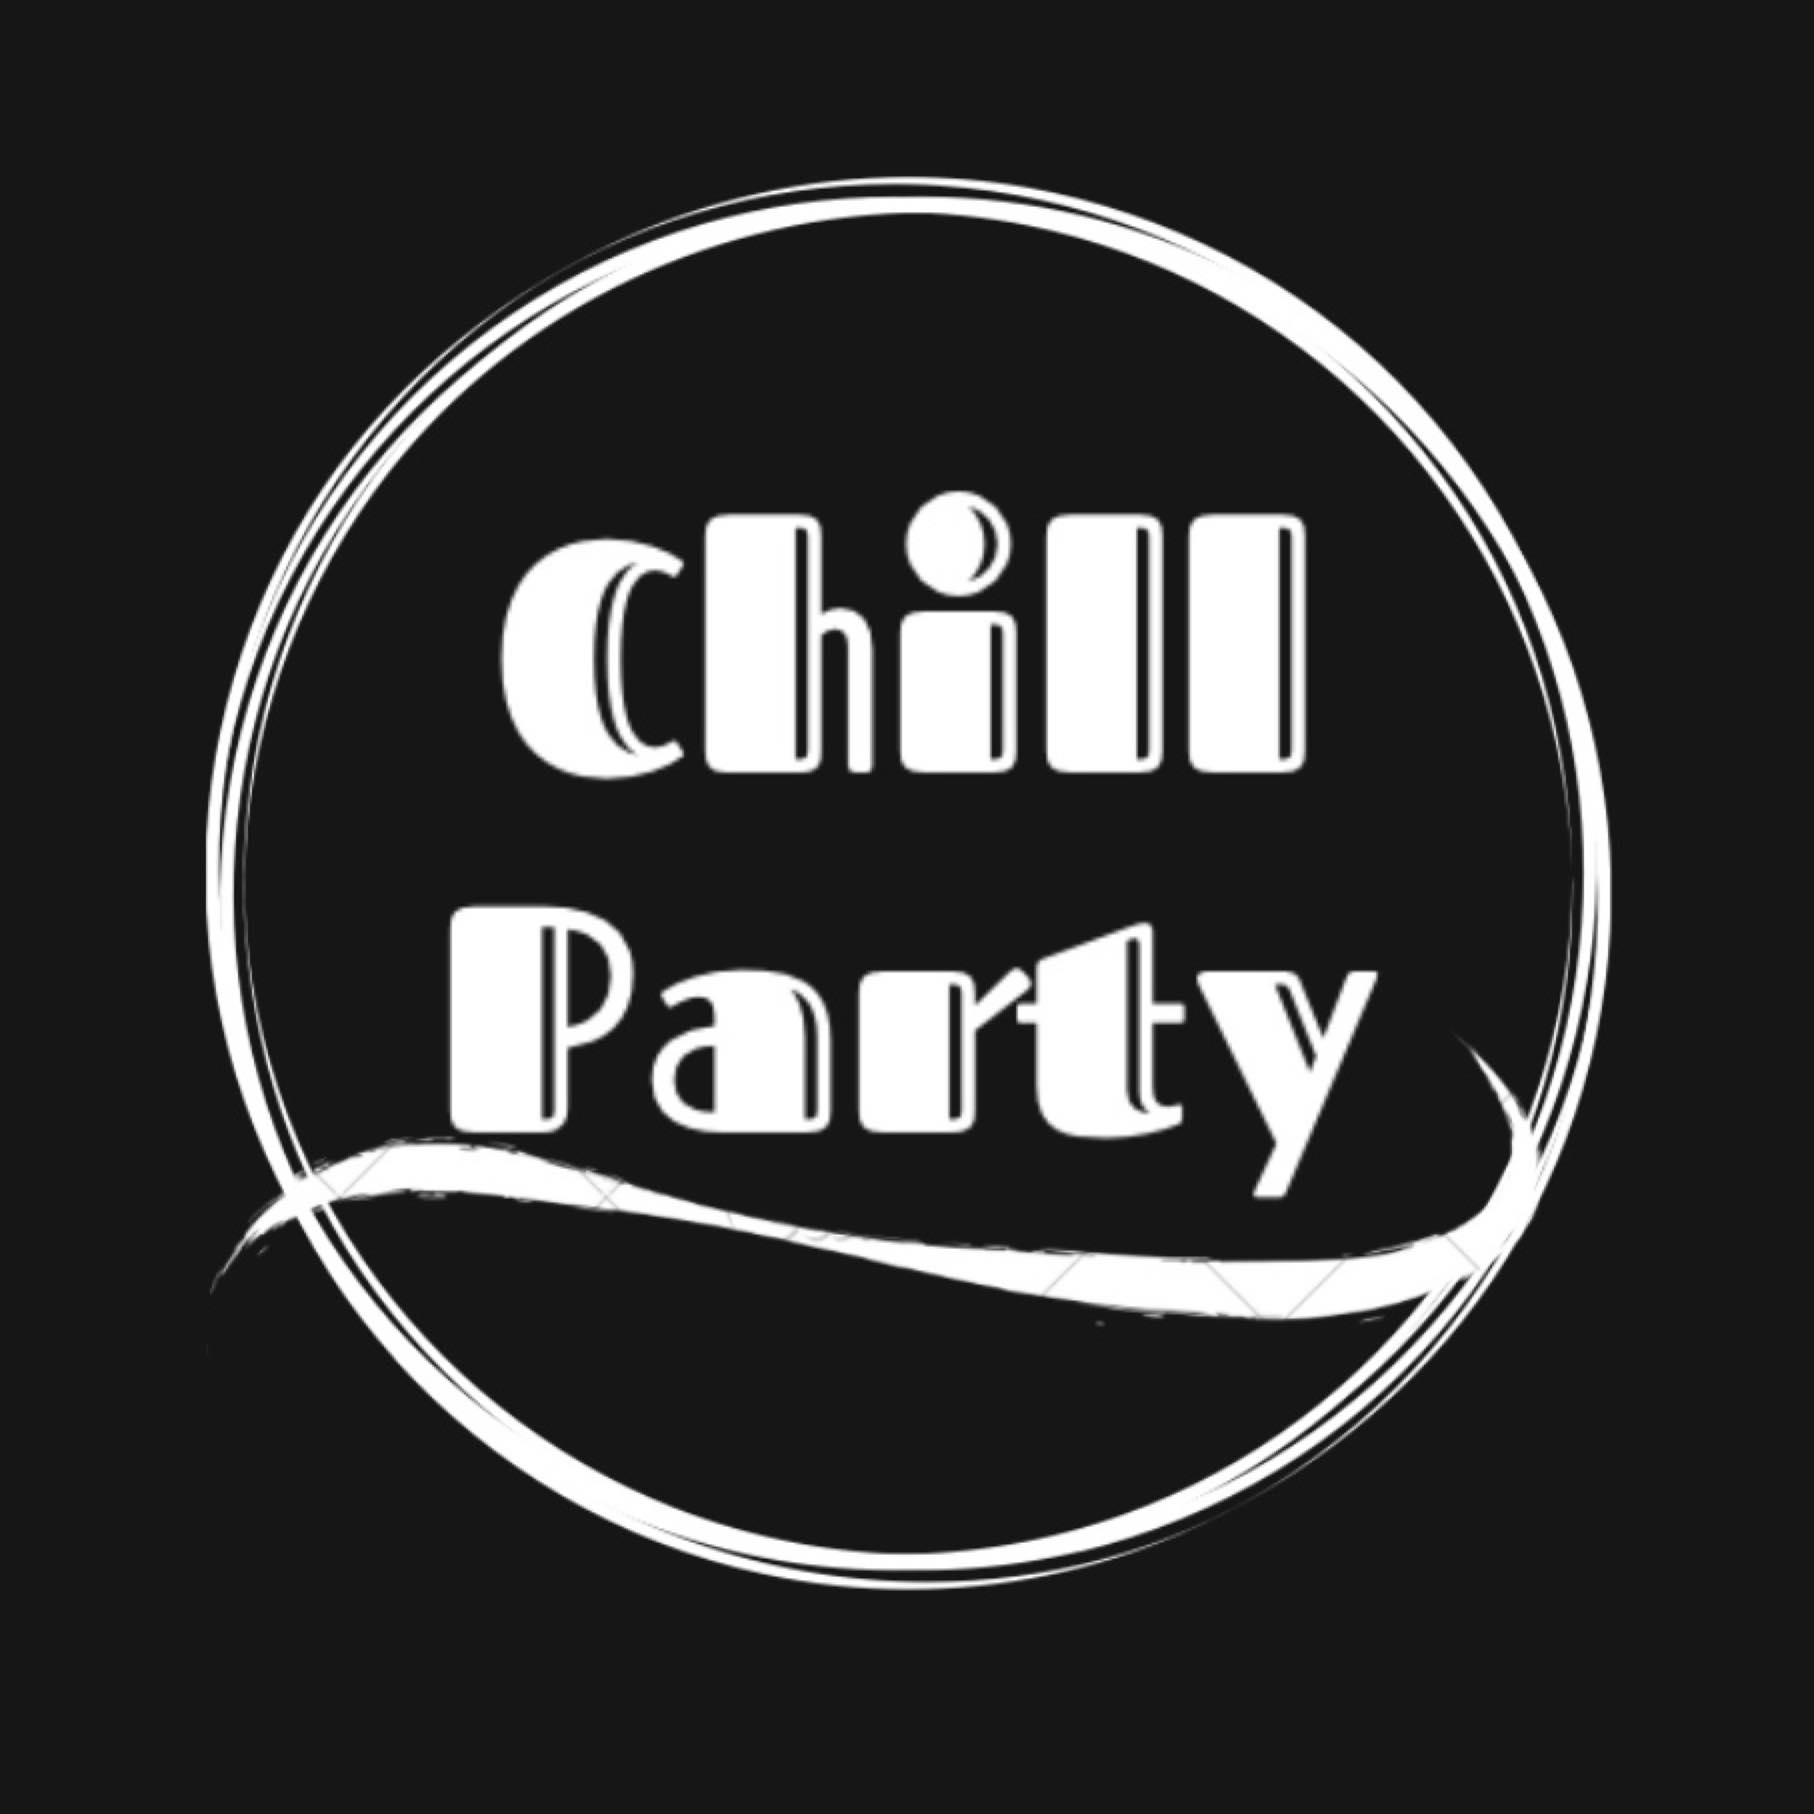 Chill party 